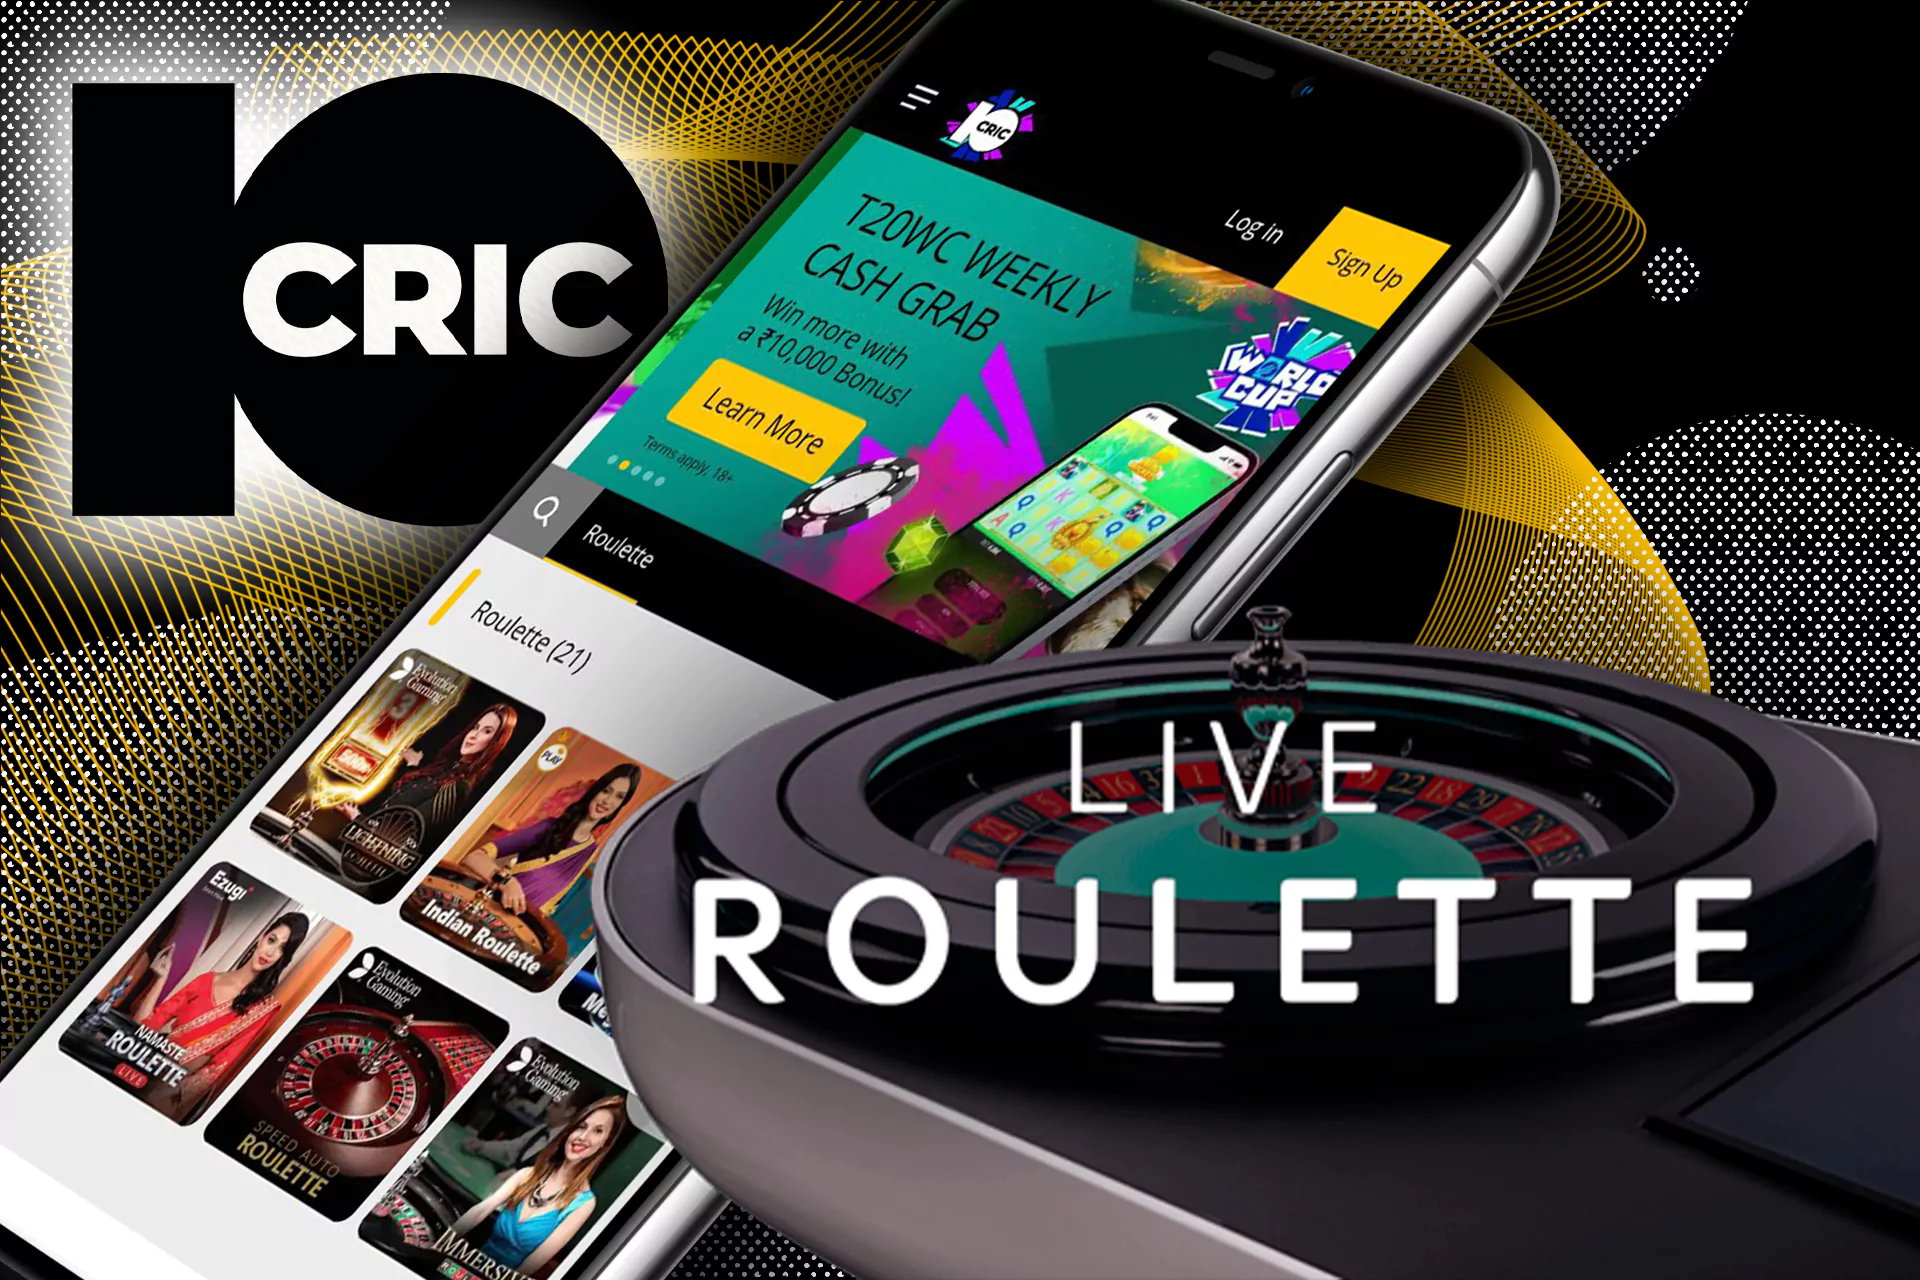 In the 10cric app, you can play with a live dealer at the roulette table.